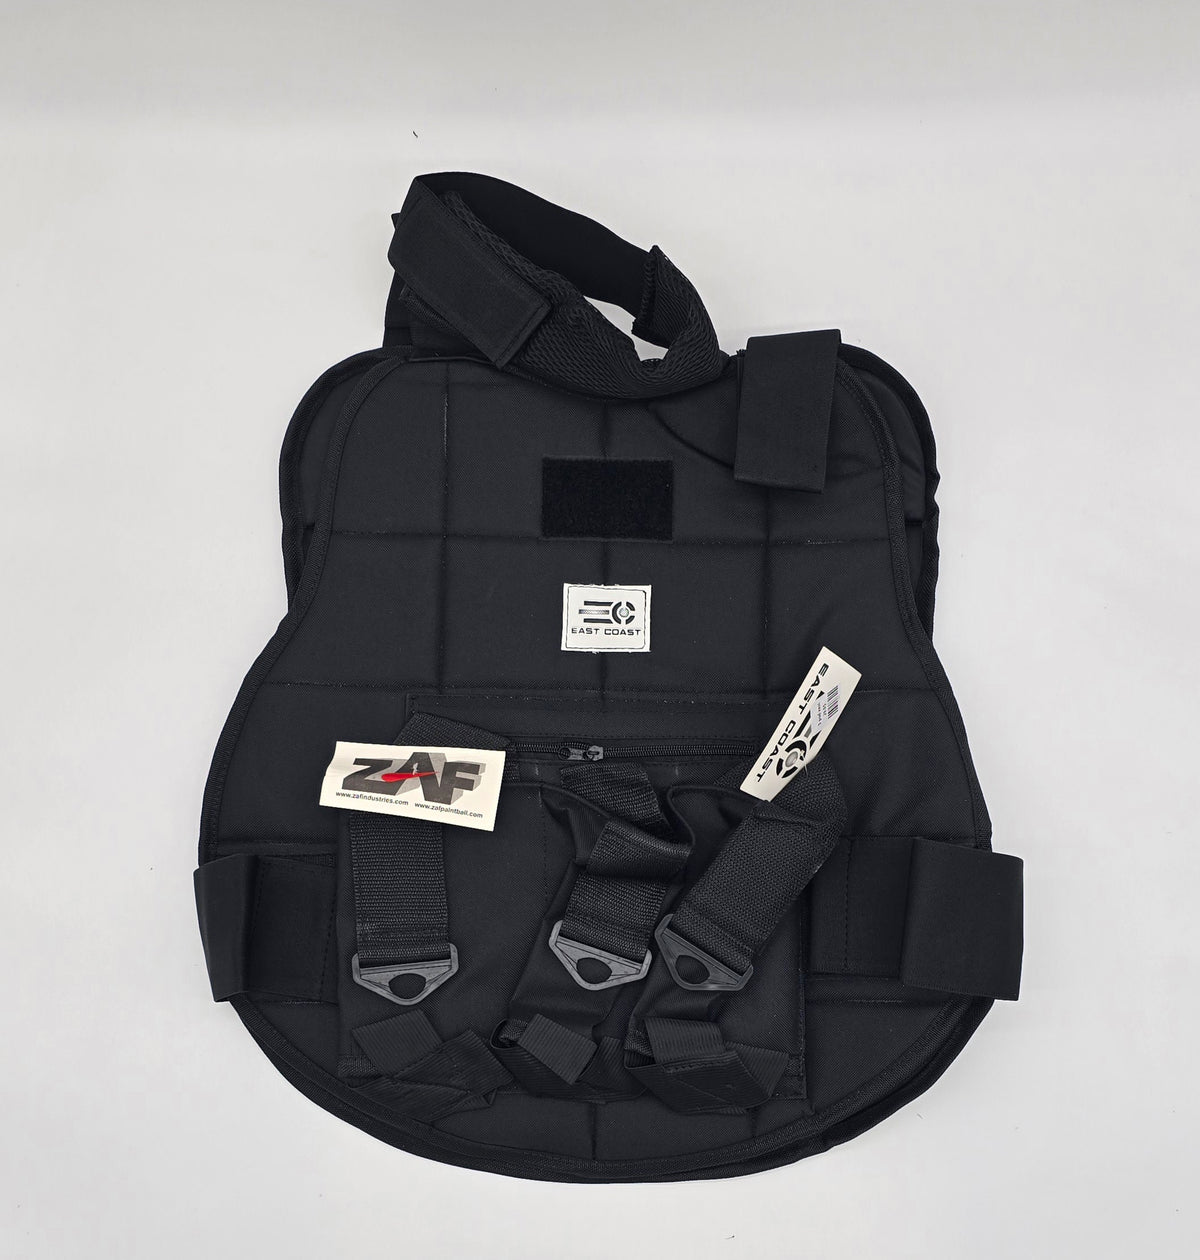 3 Pod | Padded Paintball Chest Protector | Attached Neck Protector | Black | East Coast